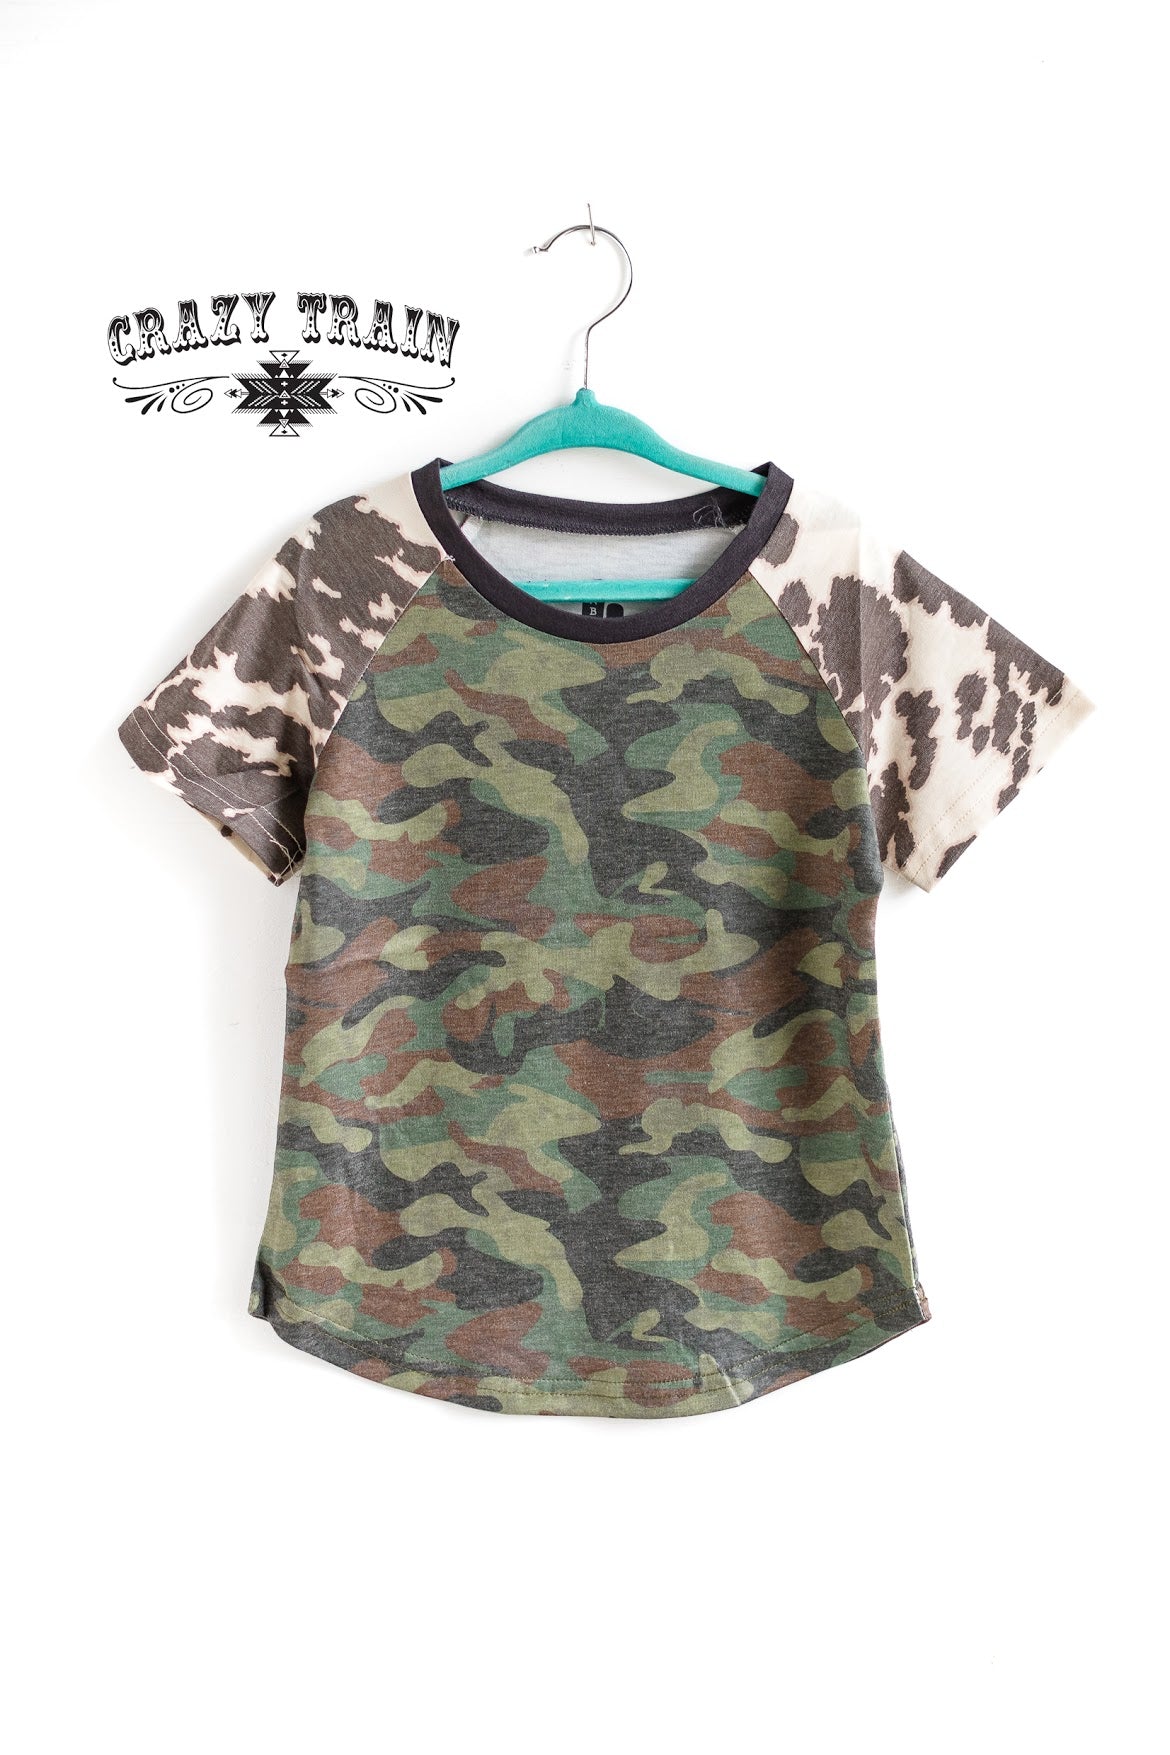 Crazy Train Boy's Huntin' Buddy Tee, Camouflage & Cow-Clothing-Sunshine and Wine Boutique